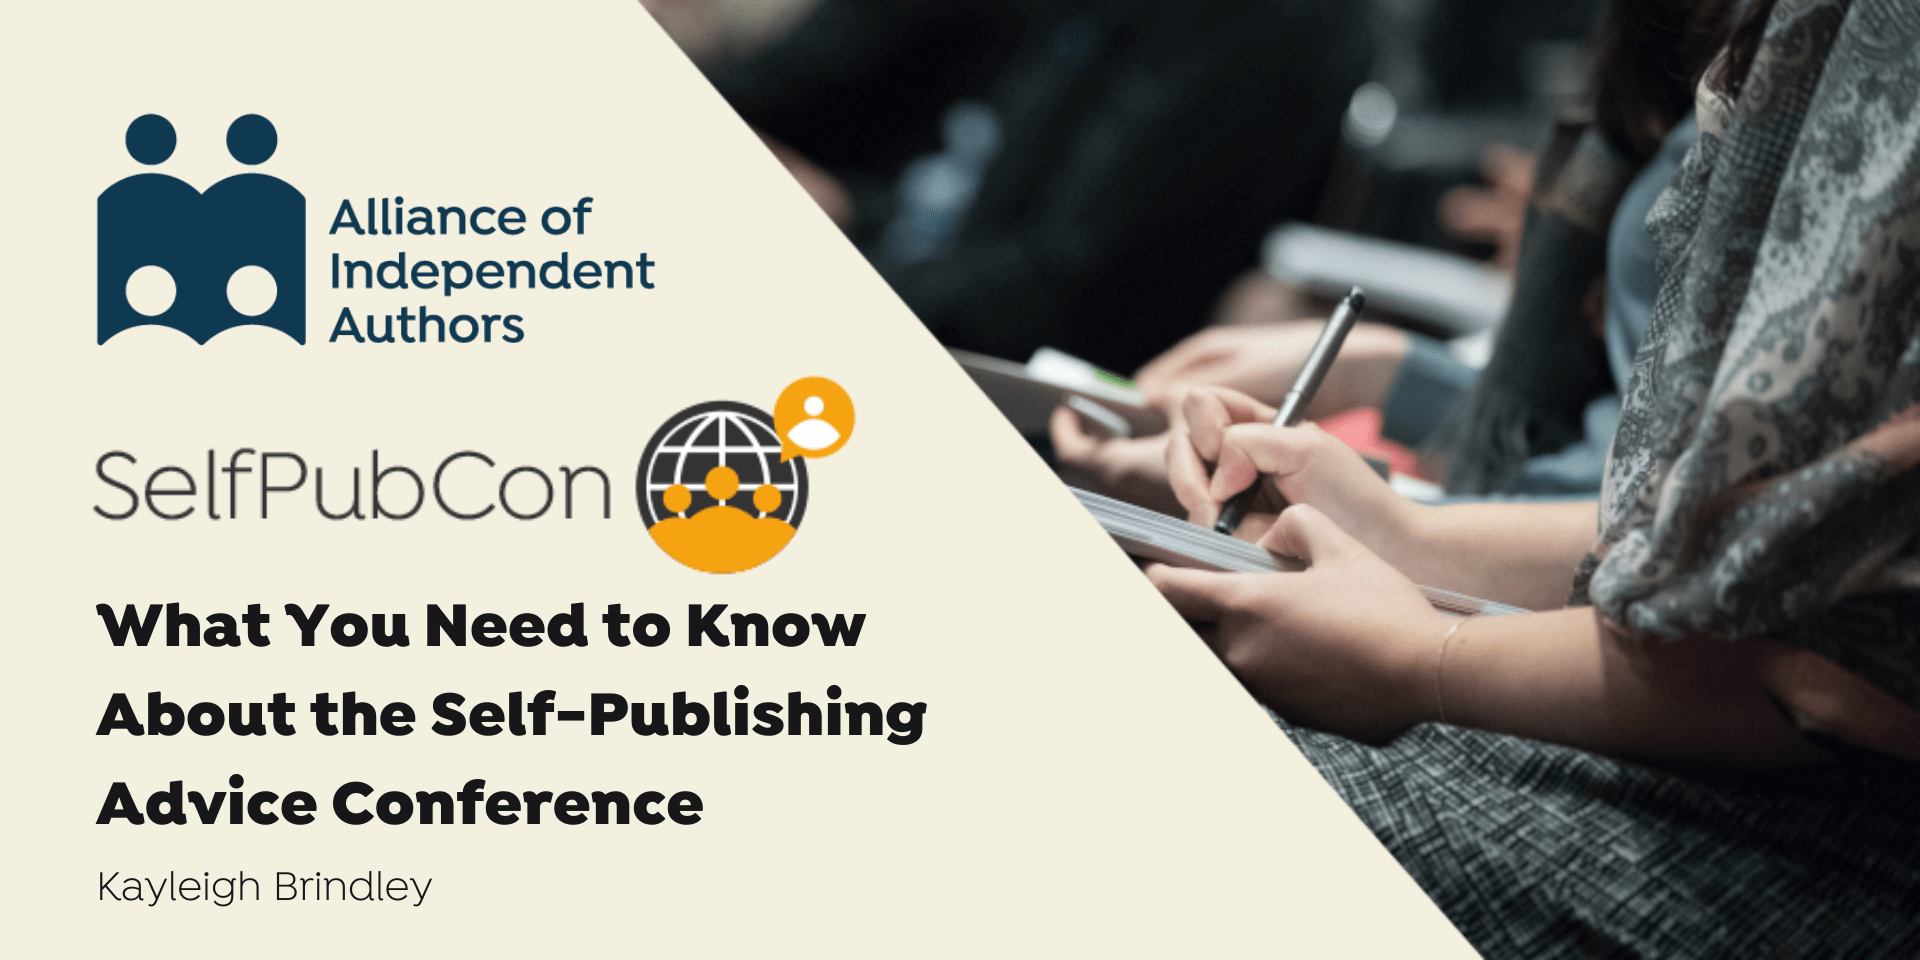 October 2020 Self-Publishing Advice Conference Is Live